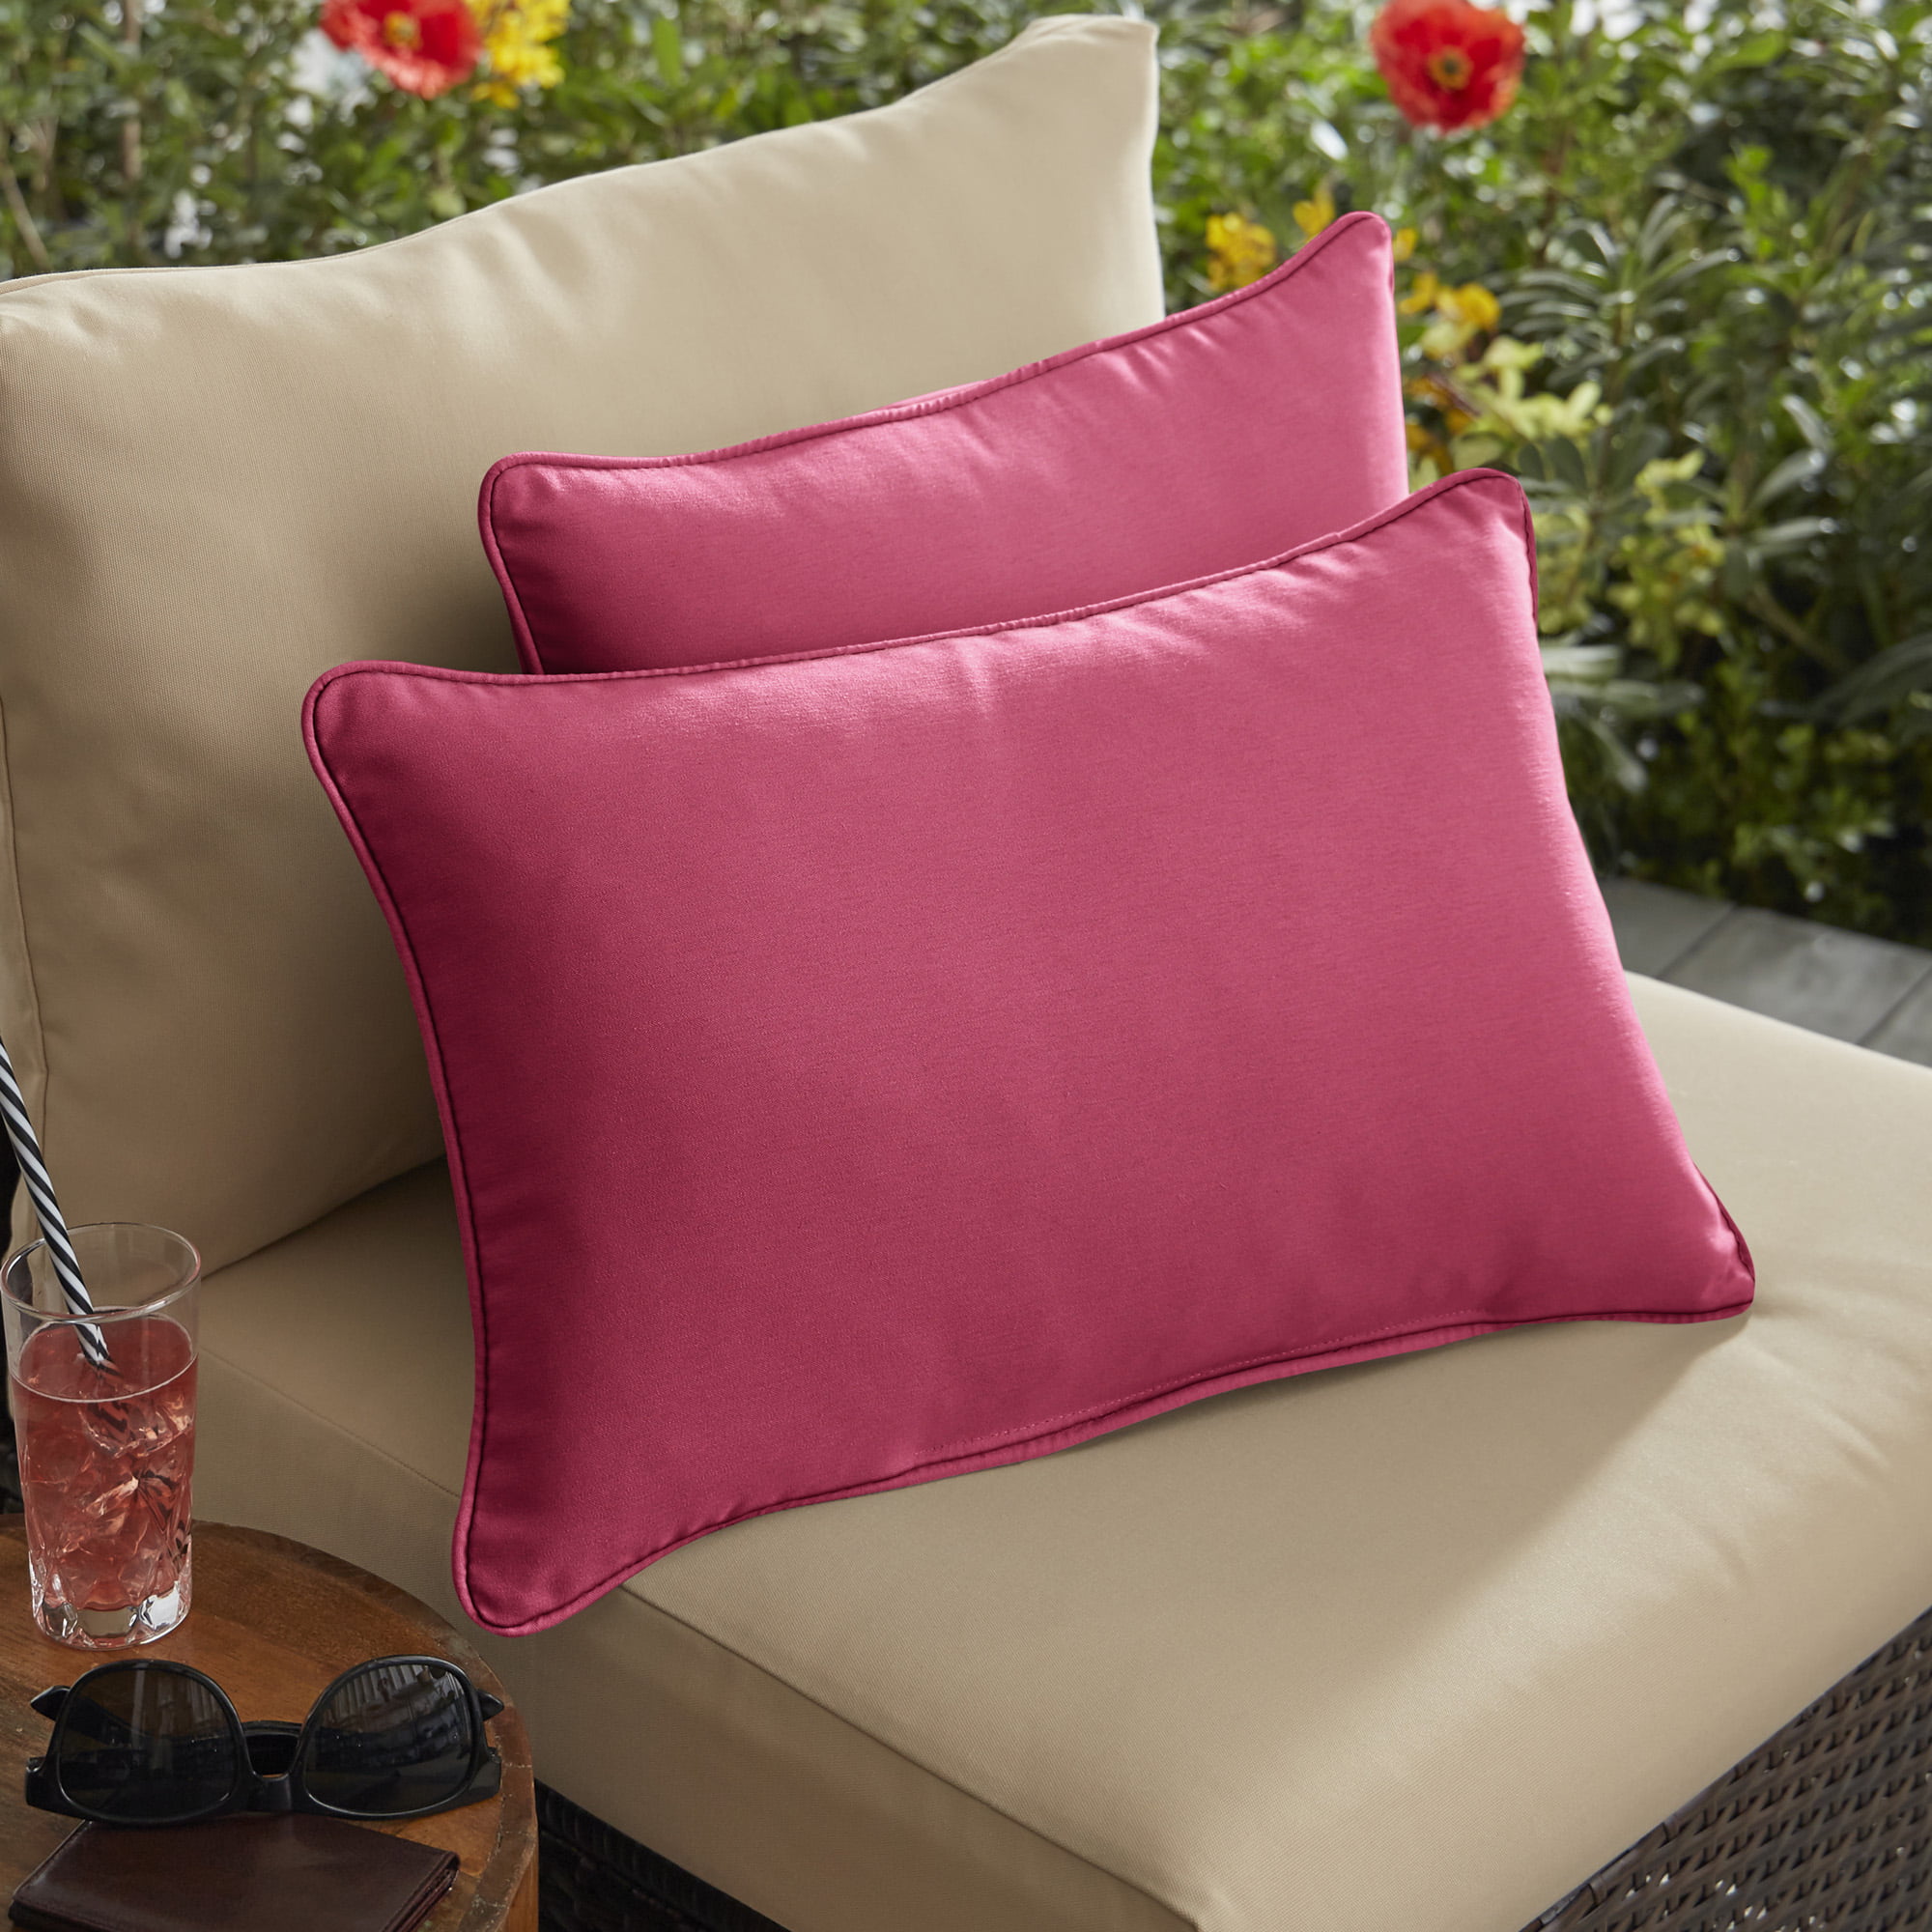 Set of 4 Indoor Outdoor Square Throw Pillows Sunbrella Canvas Hot Pink 